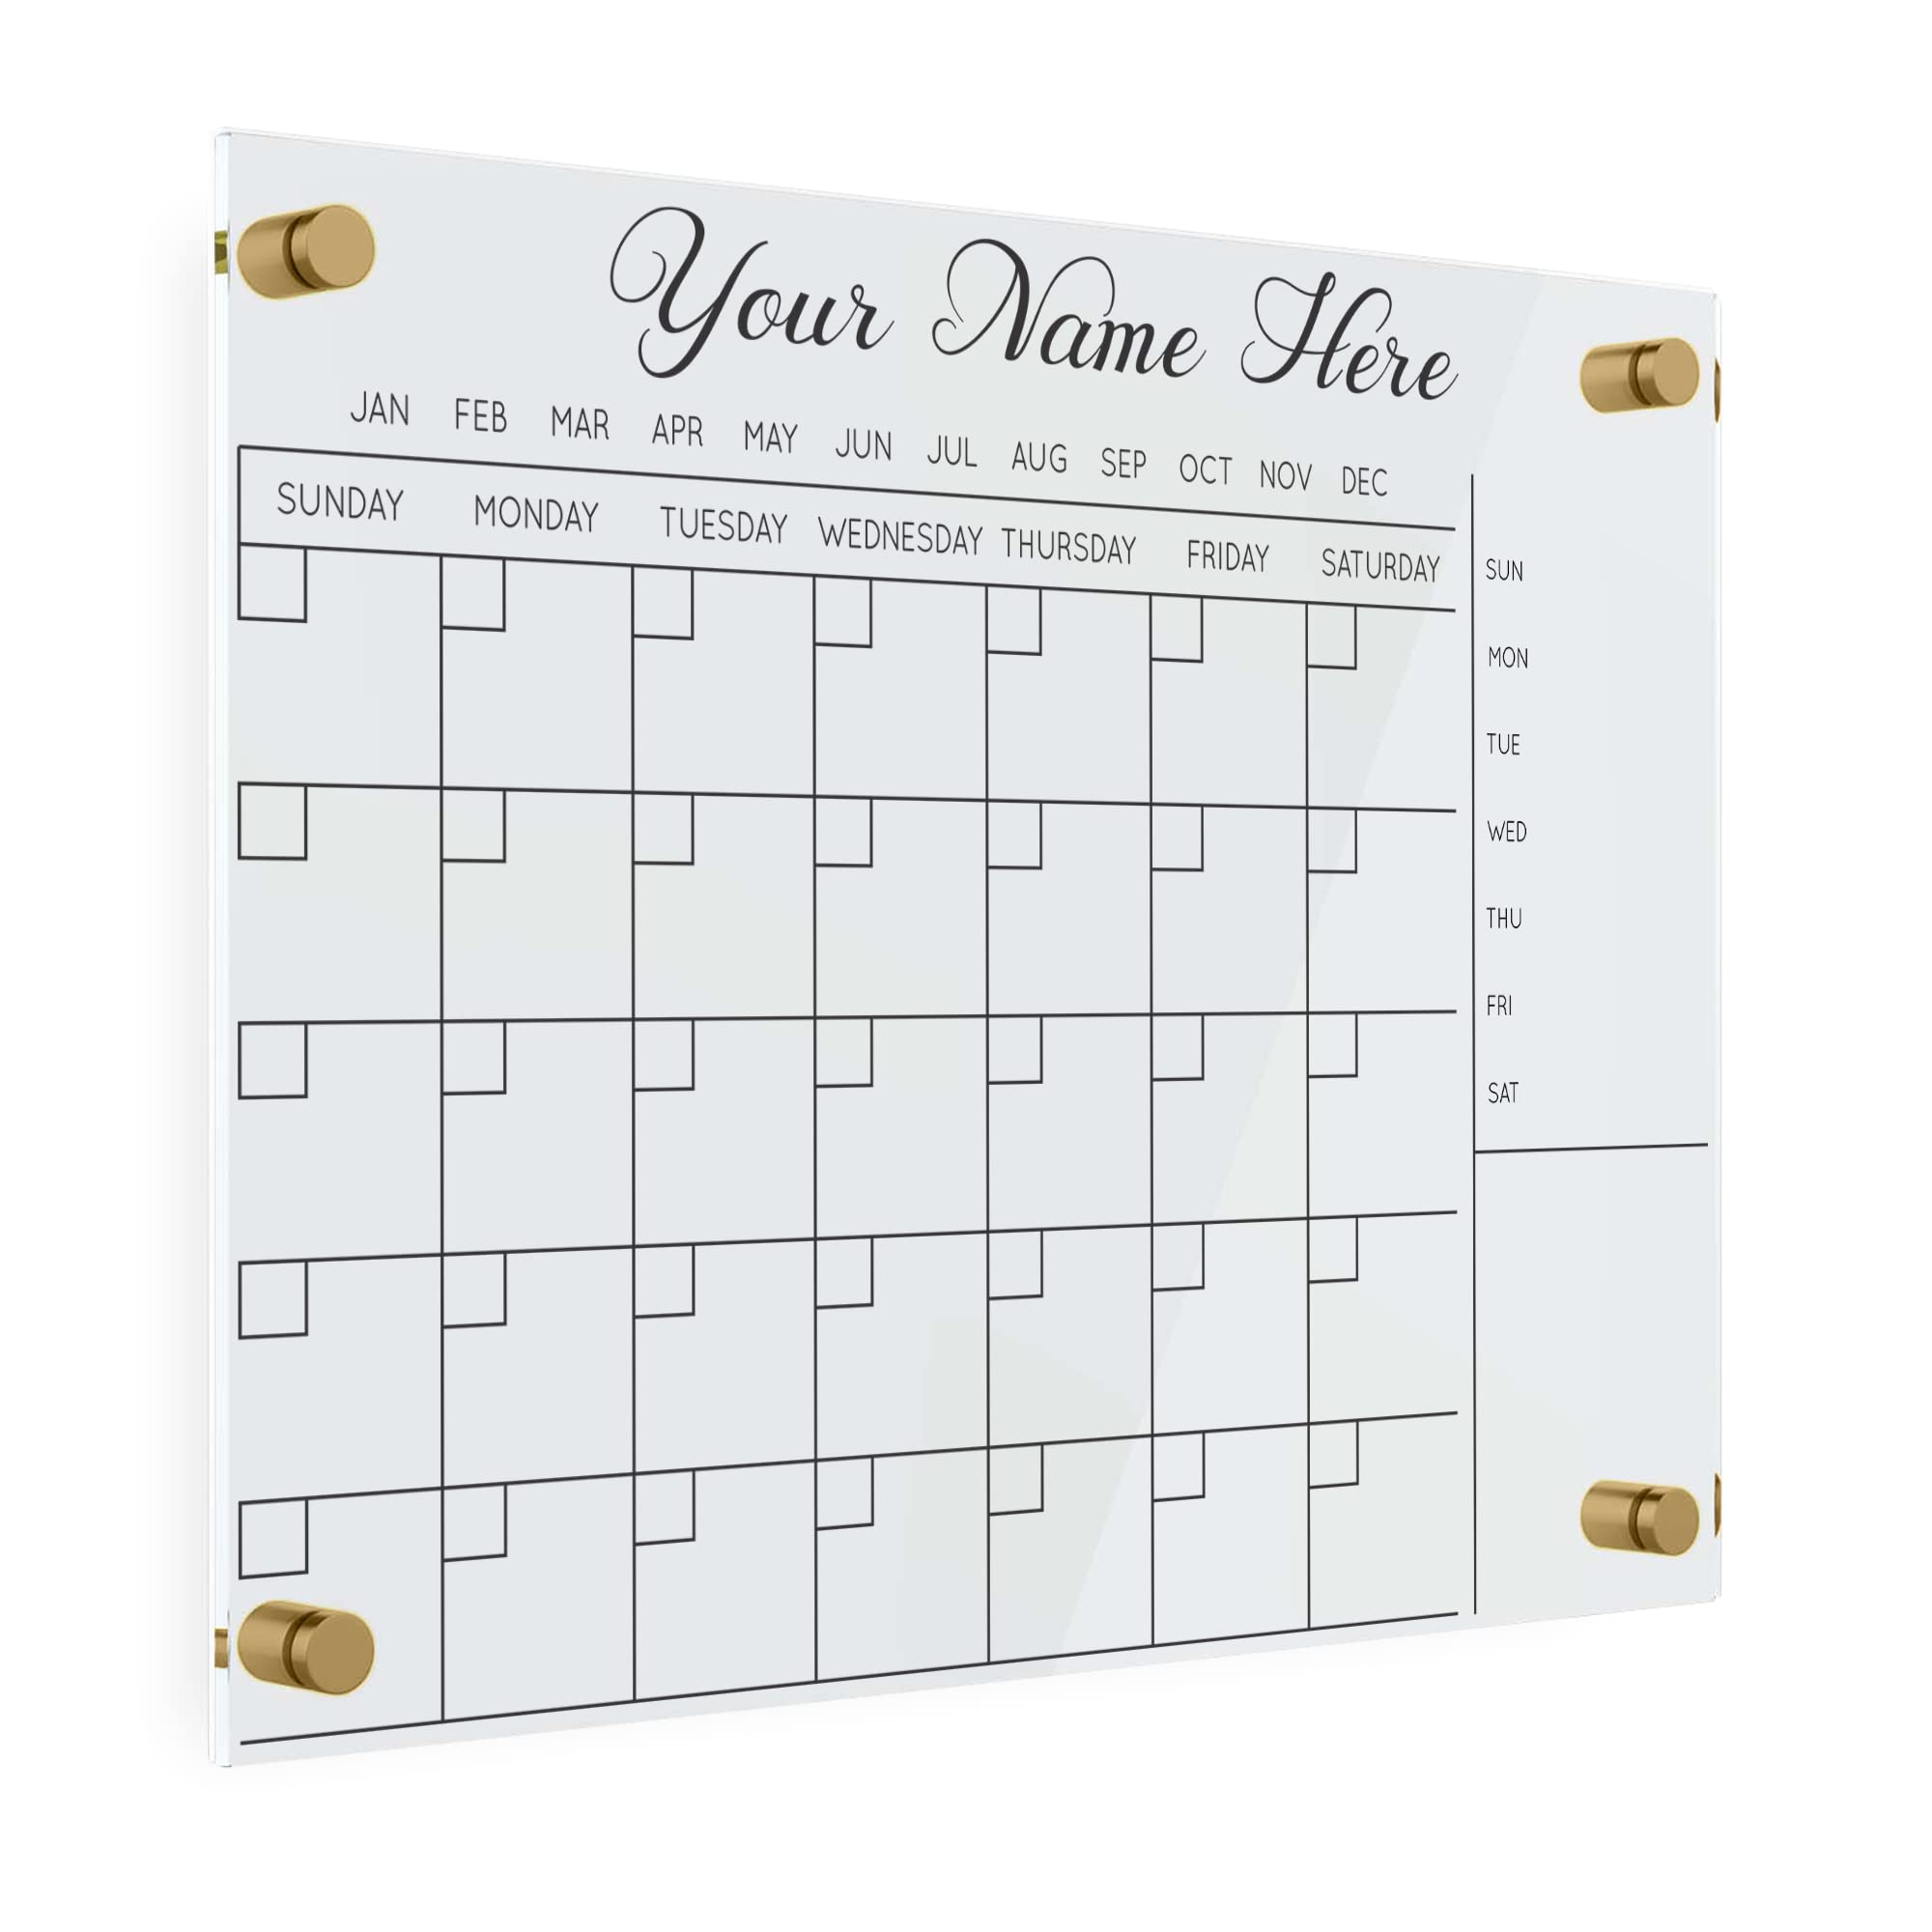 Personalized Acrylic Calendar for Wall - Ships Next Day, Made in America, Clear Dry Erase Planner for Home, Office, & Family, Glass Calendar Alternative, Easy to Clean (Clear - 16x20)